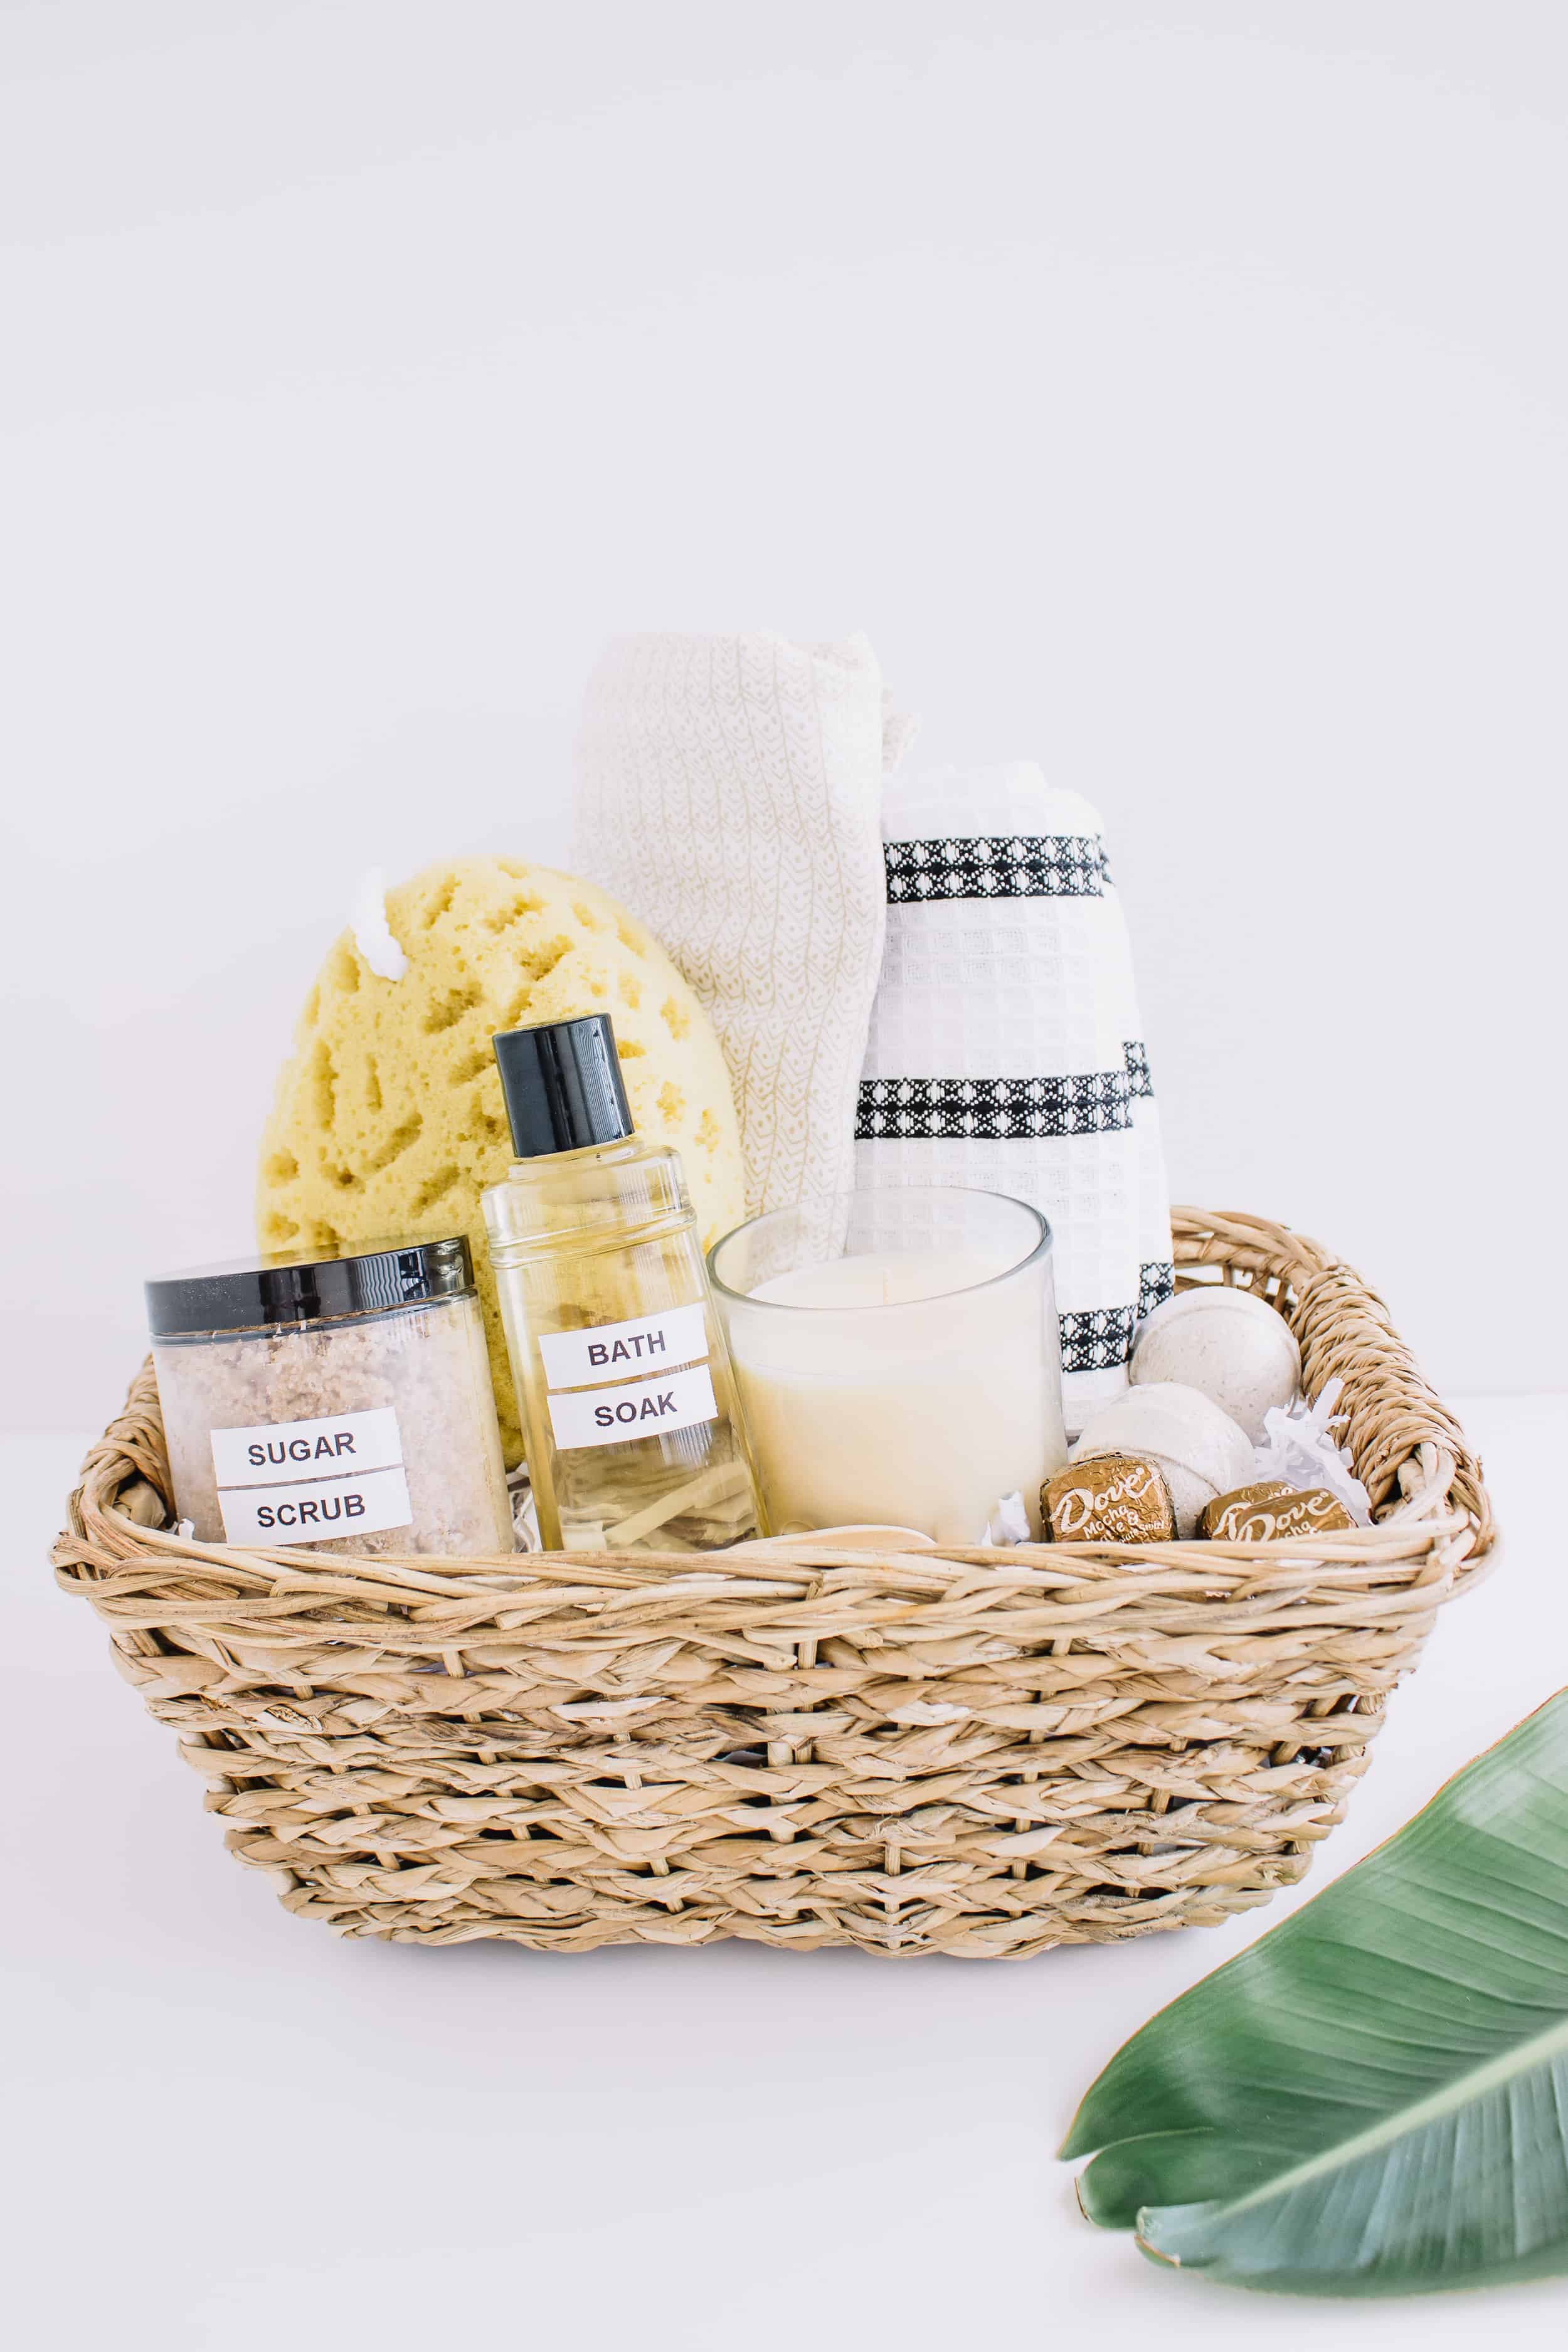 The perfect diy spa kit to unwind and relax at home. Also a great gift idea for mom to enjoy on her birthday, Christmas or Mother's Day. // @dovechocolateus #UnwindWithDove #ad